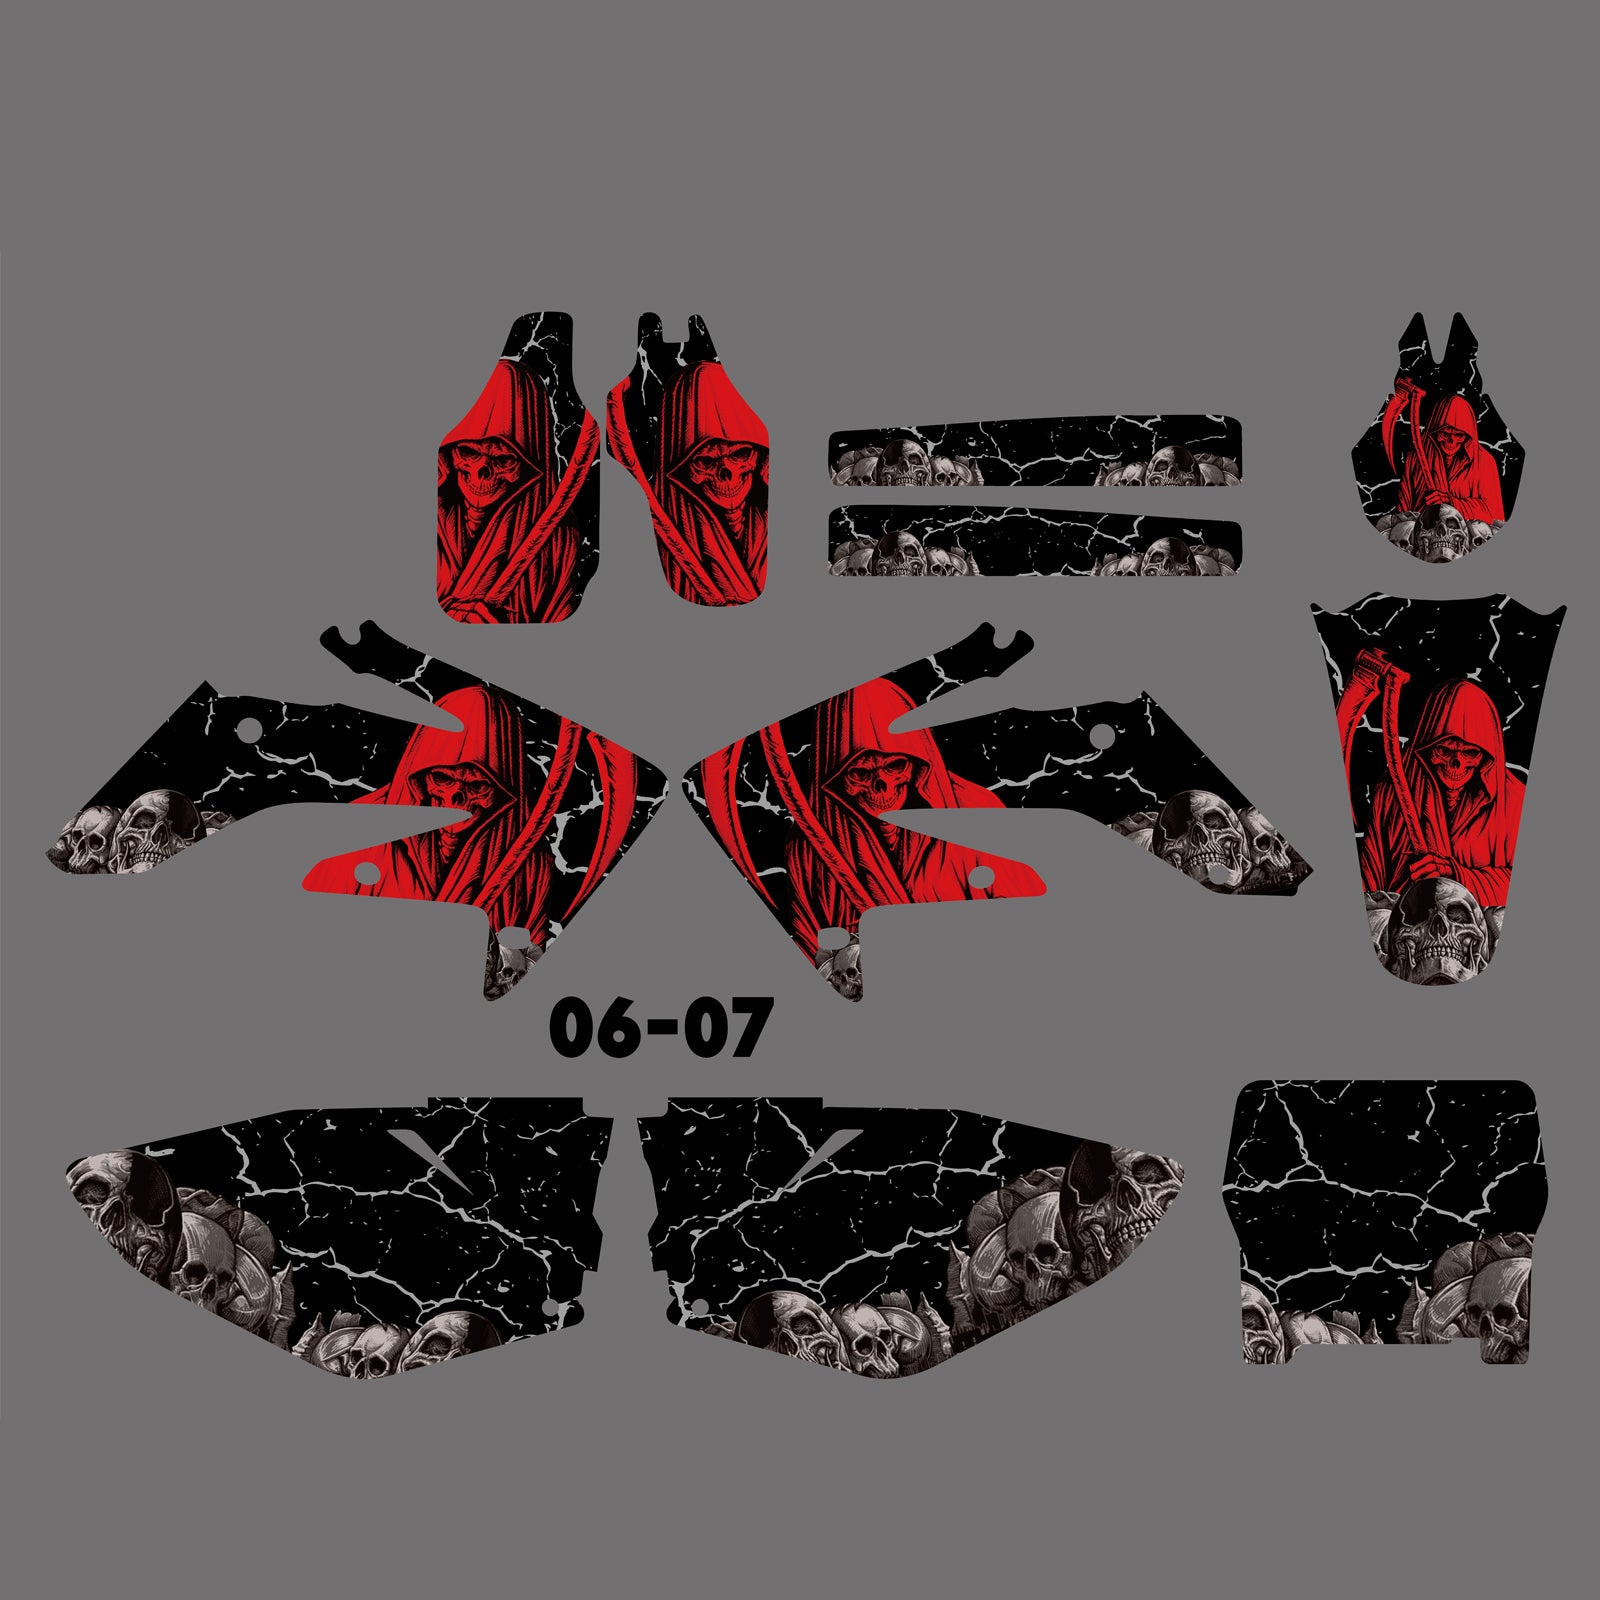 Team Graphics Backgrounds Decals Stickers For HONDA CRF250 2006-2007